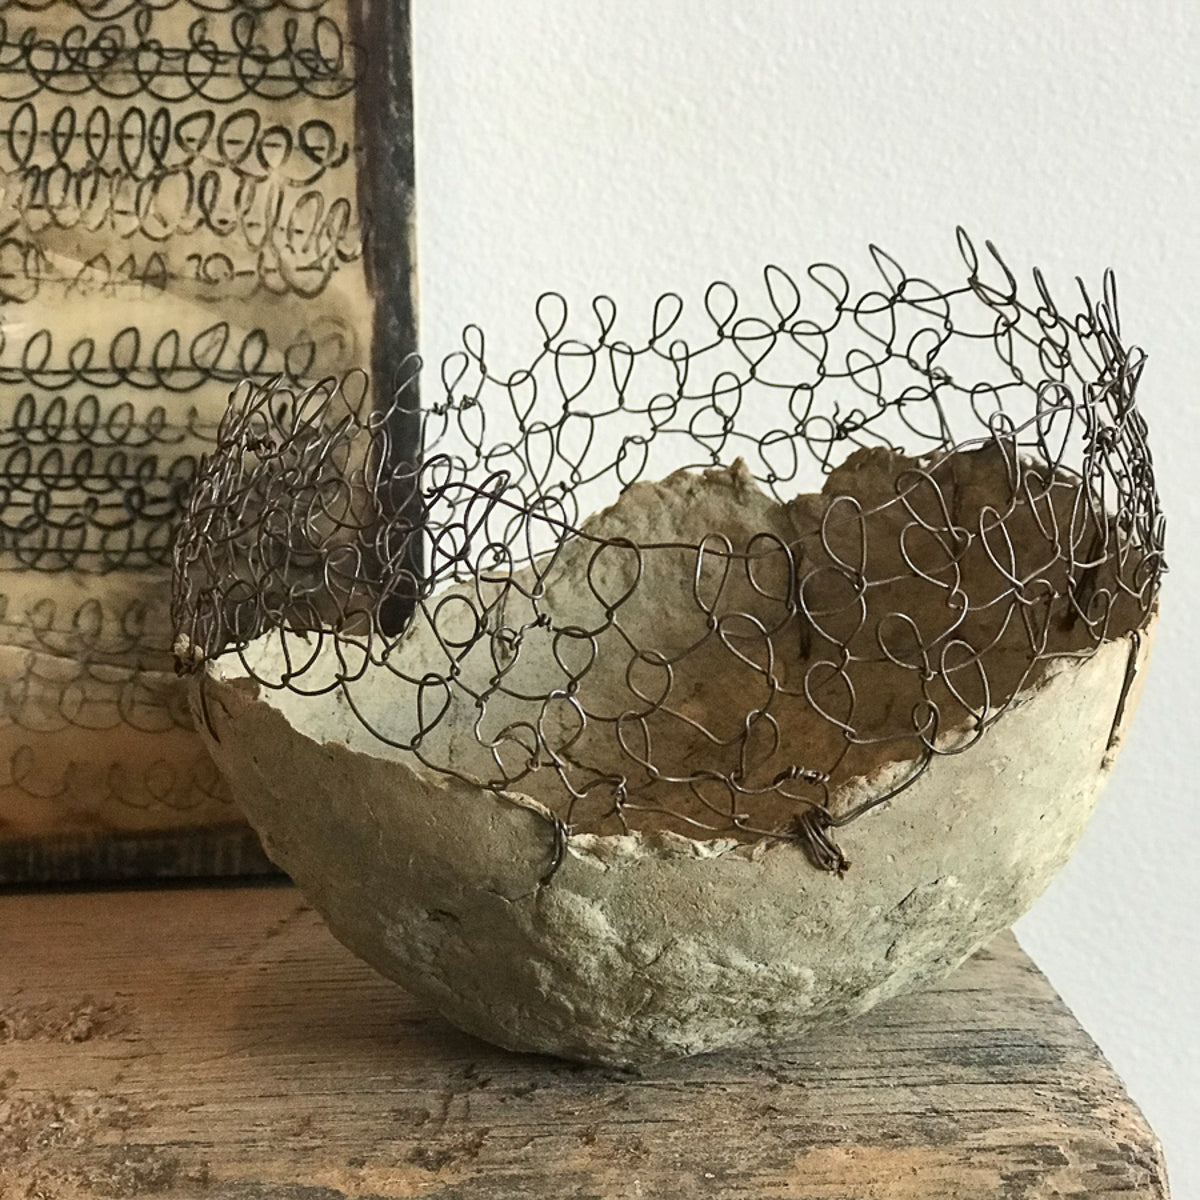 Vessel Study No. 38, handmade with recycled cardboard boxes and wire. A one-of-a-kind Jennifer Alden Design contemporary sculpture. Encaustic etched loop painting in background.